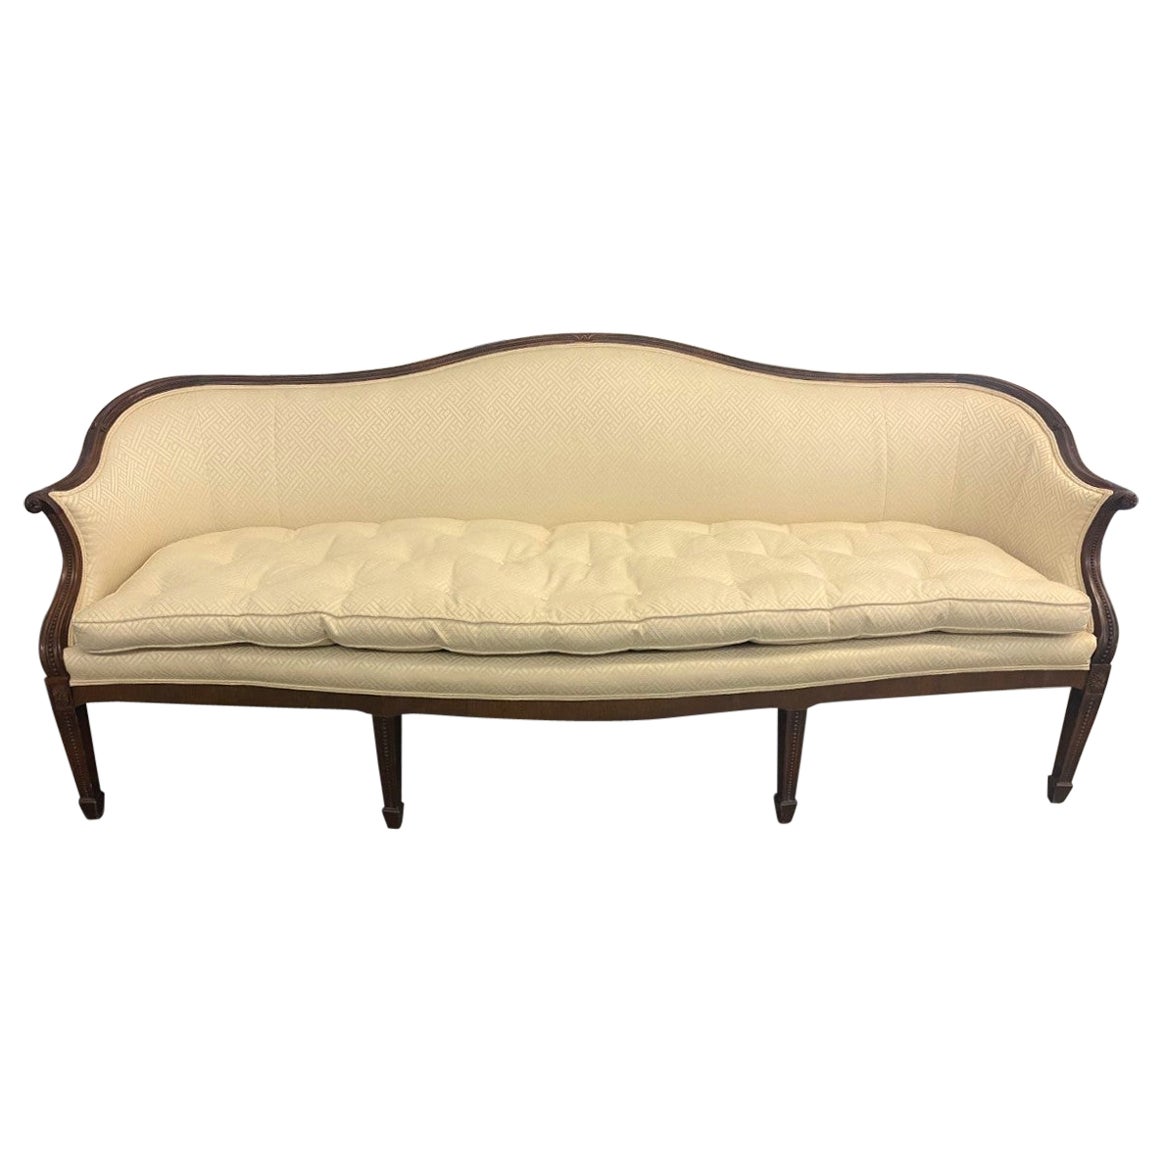 Mahogany Serpentine Shaped Hepplewhite Style Sofa with Pea and Foliate Carving